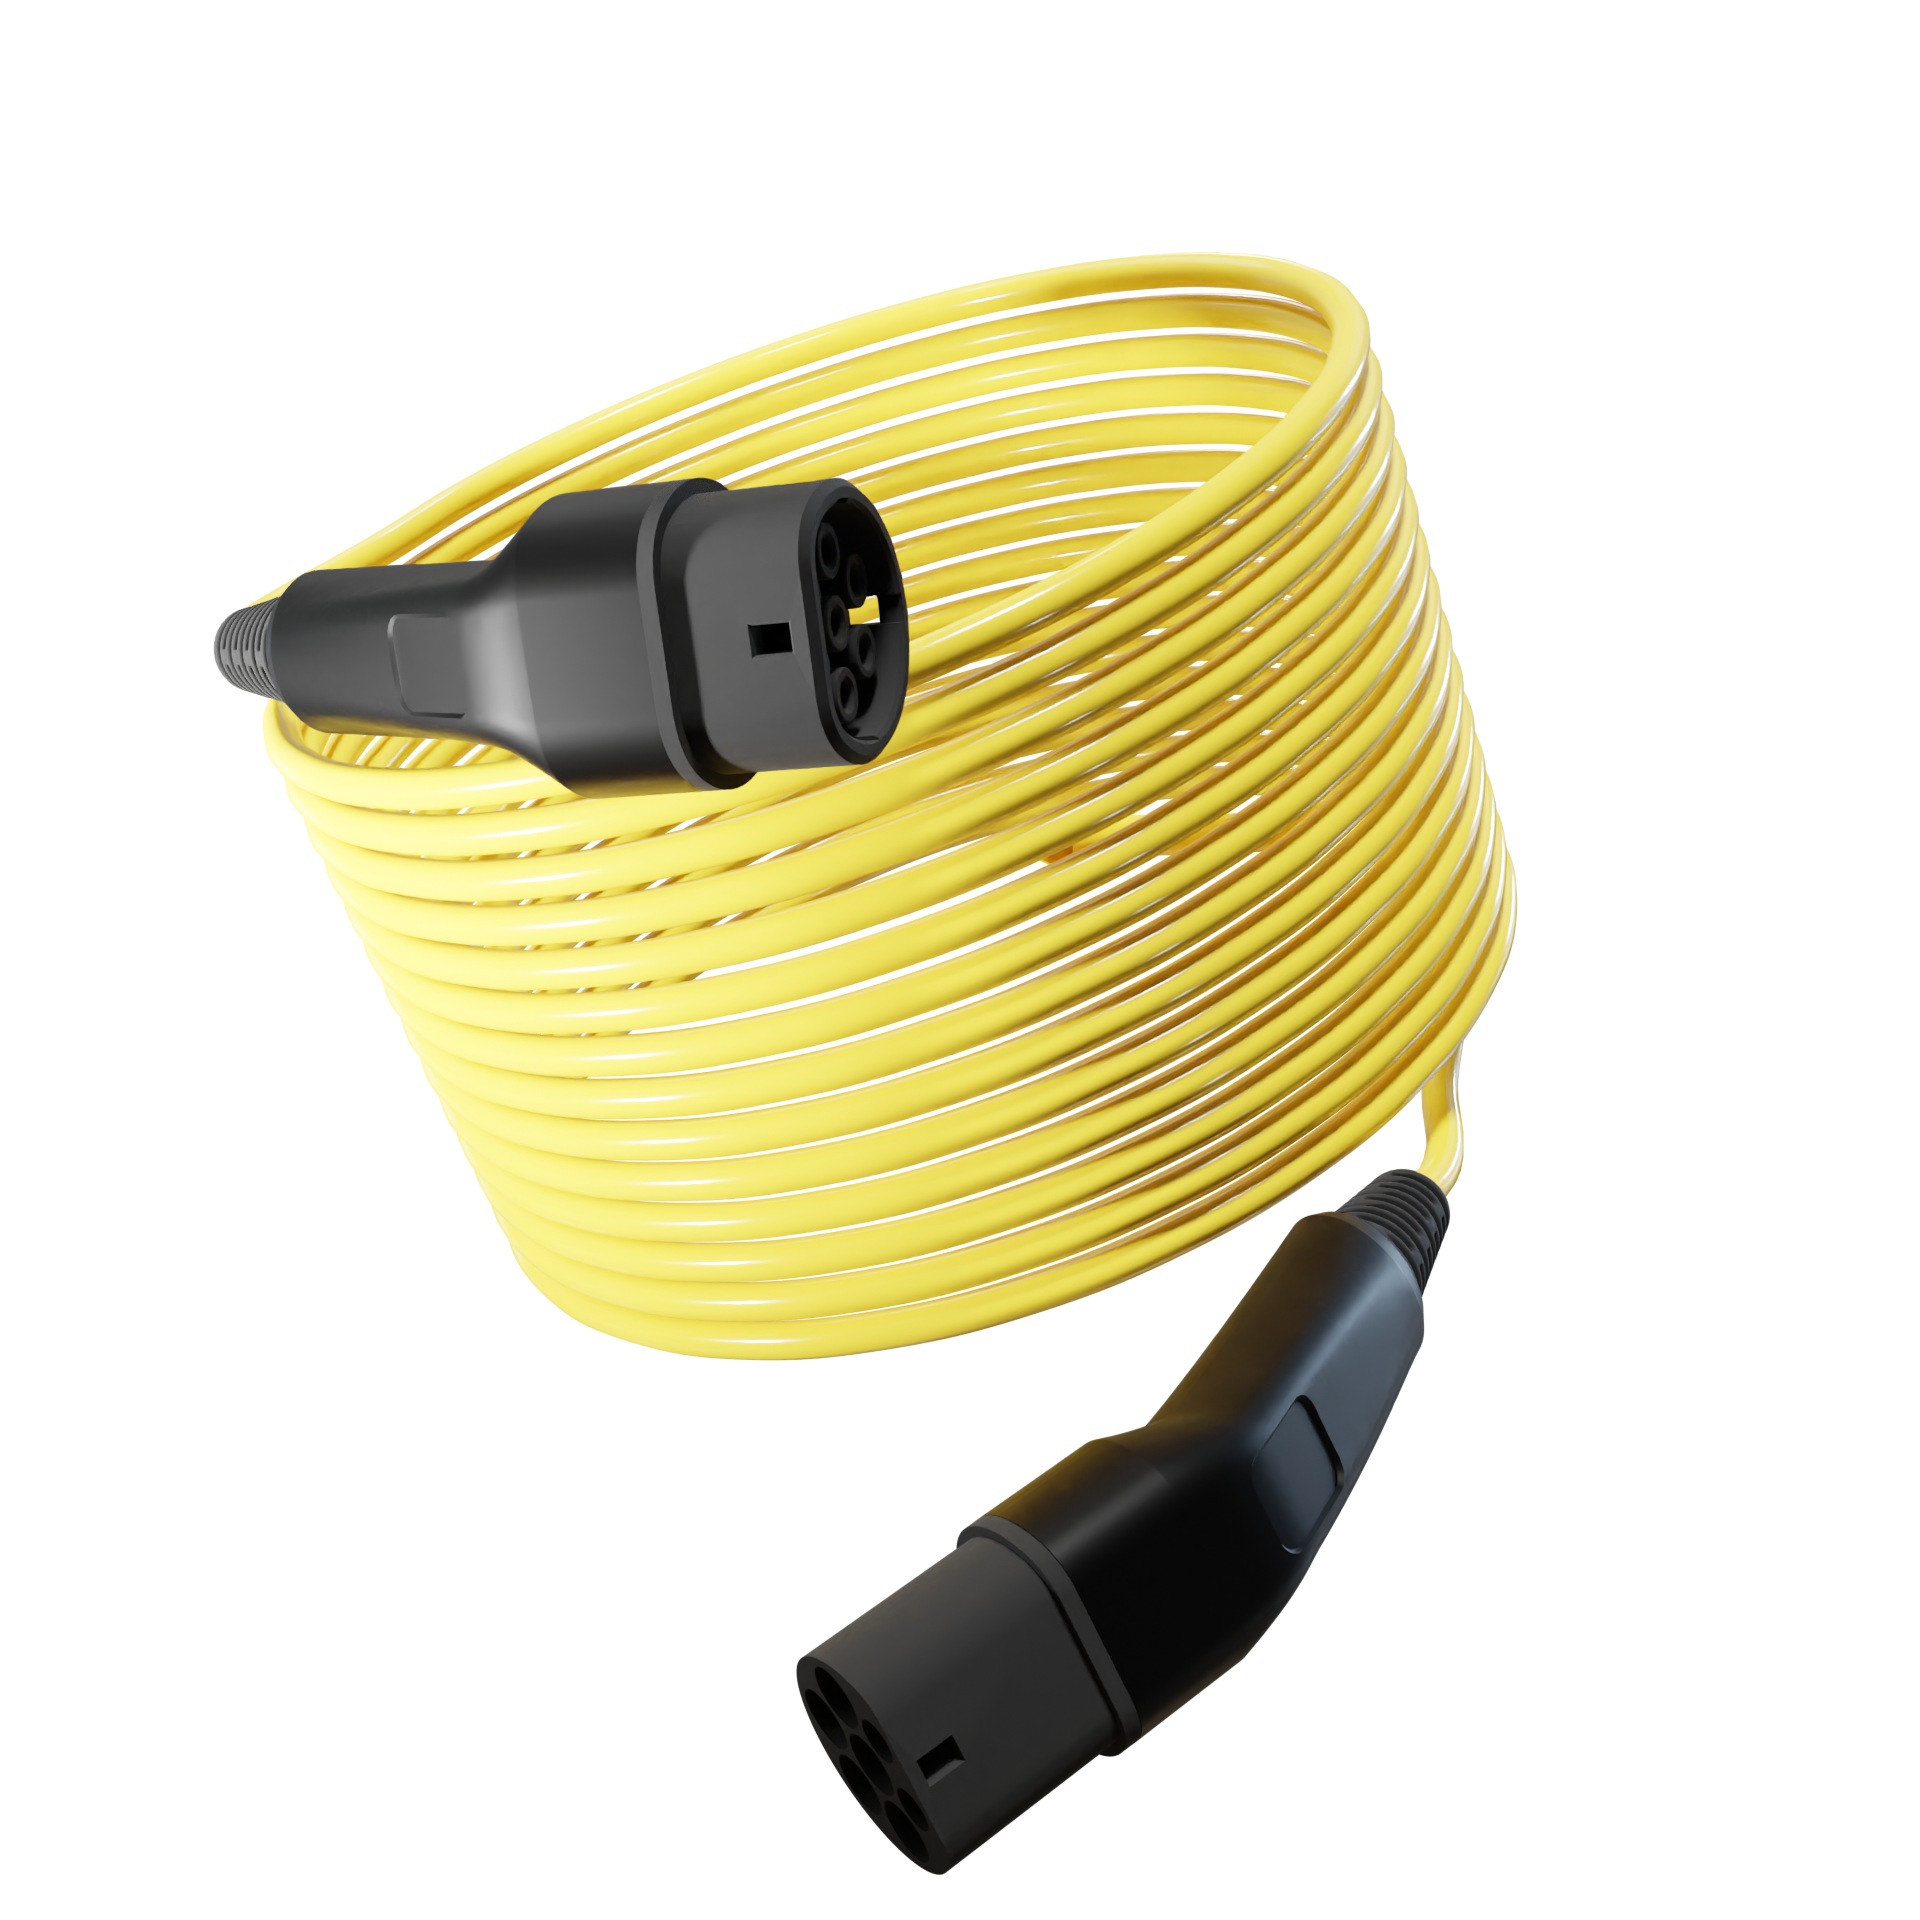 Type 2 to Type 2 EV Charging Cable - BlackType 2 to Type 2 EV Charging Cable - 25m - Yellow